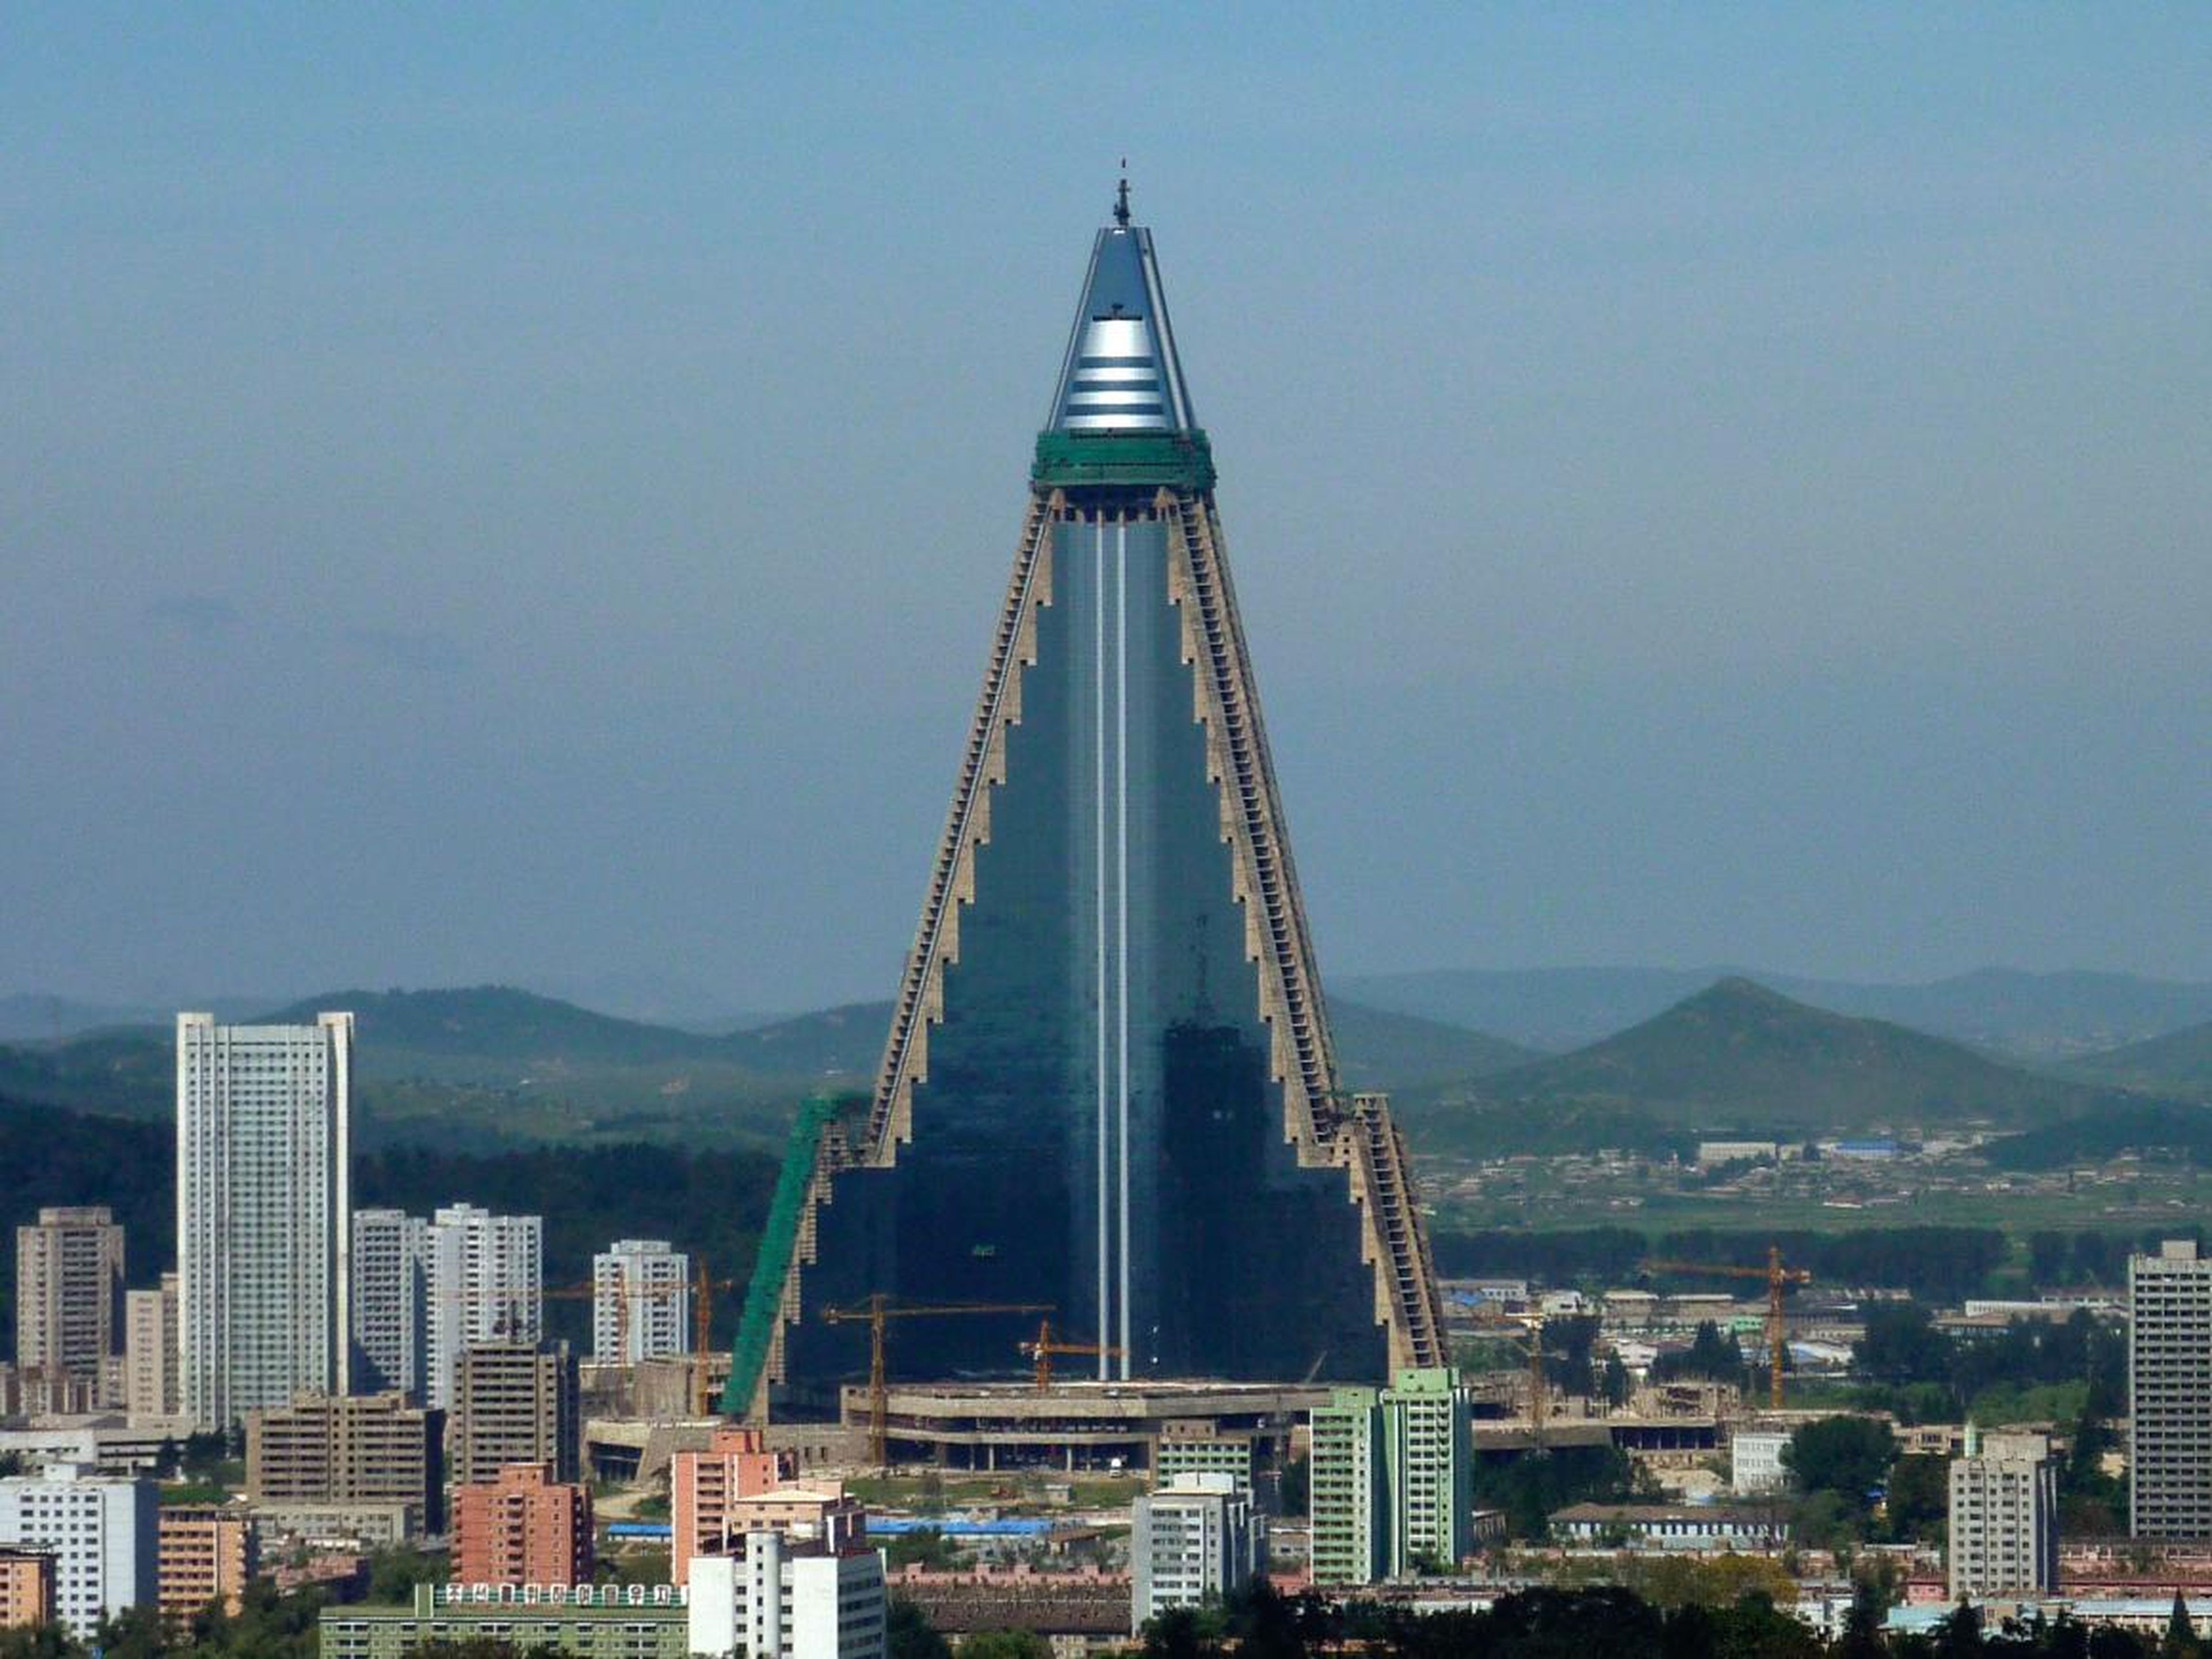 The Ryugyong Hotel is the tallest unoccupied building in the world.